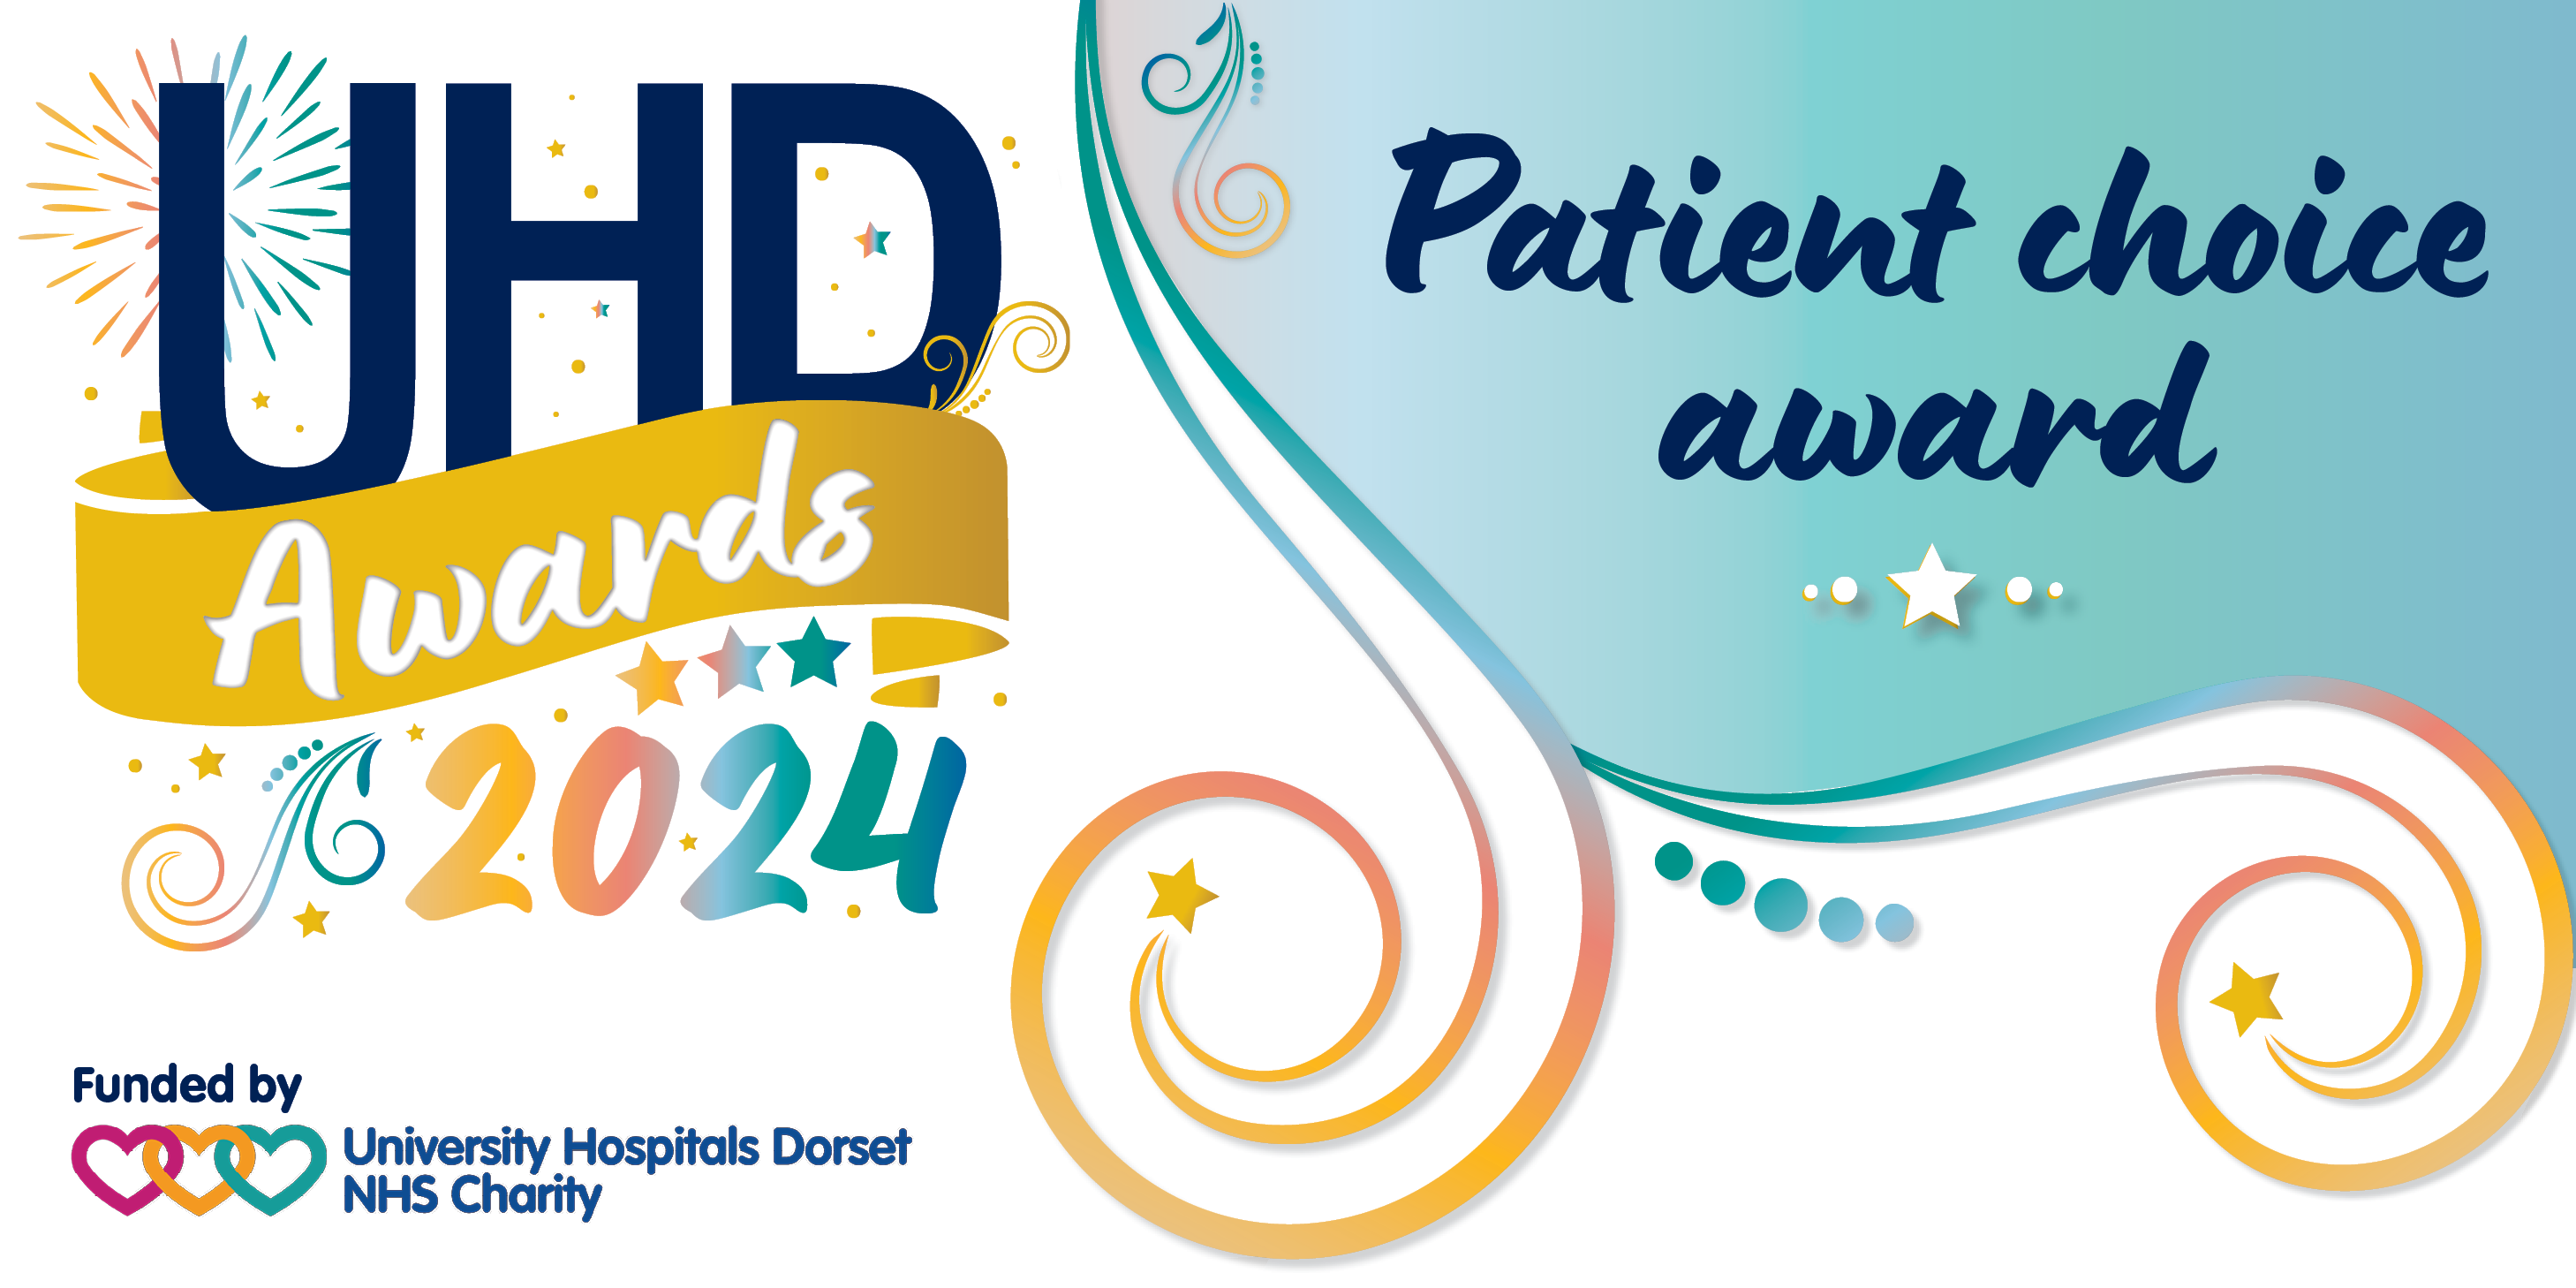 One week left to nominate for our Patient Choice awards!